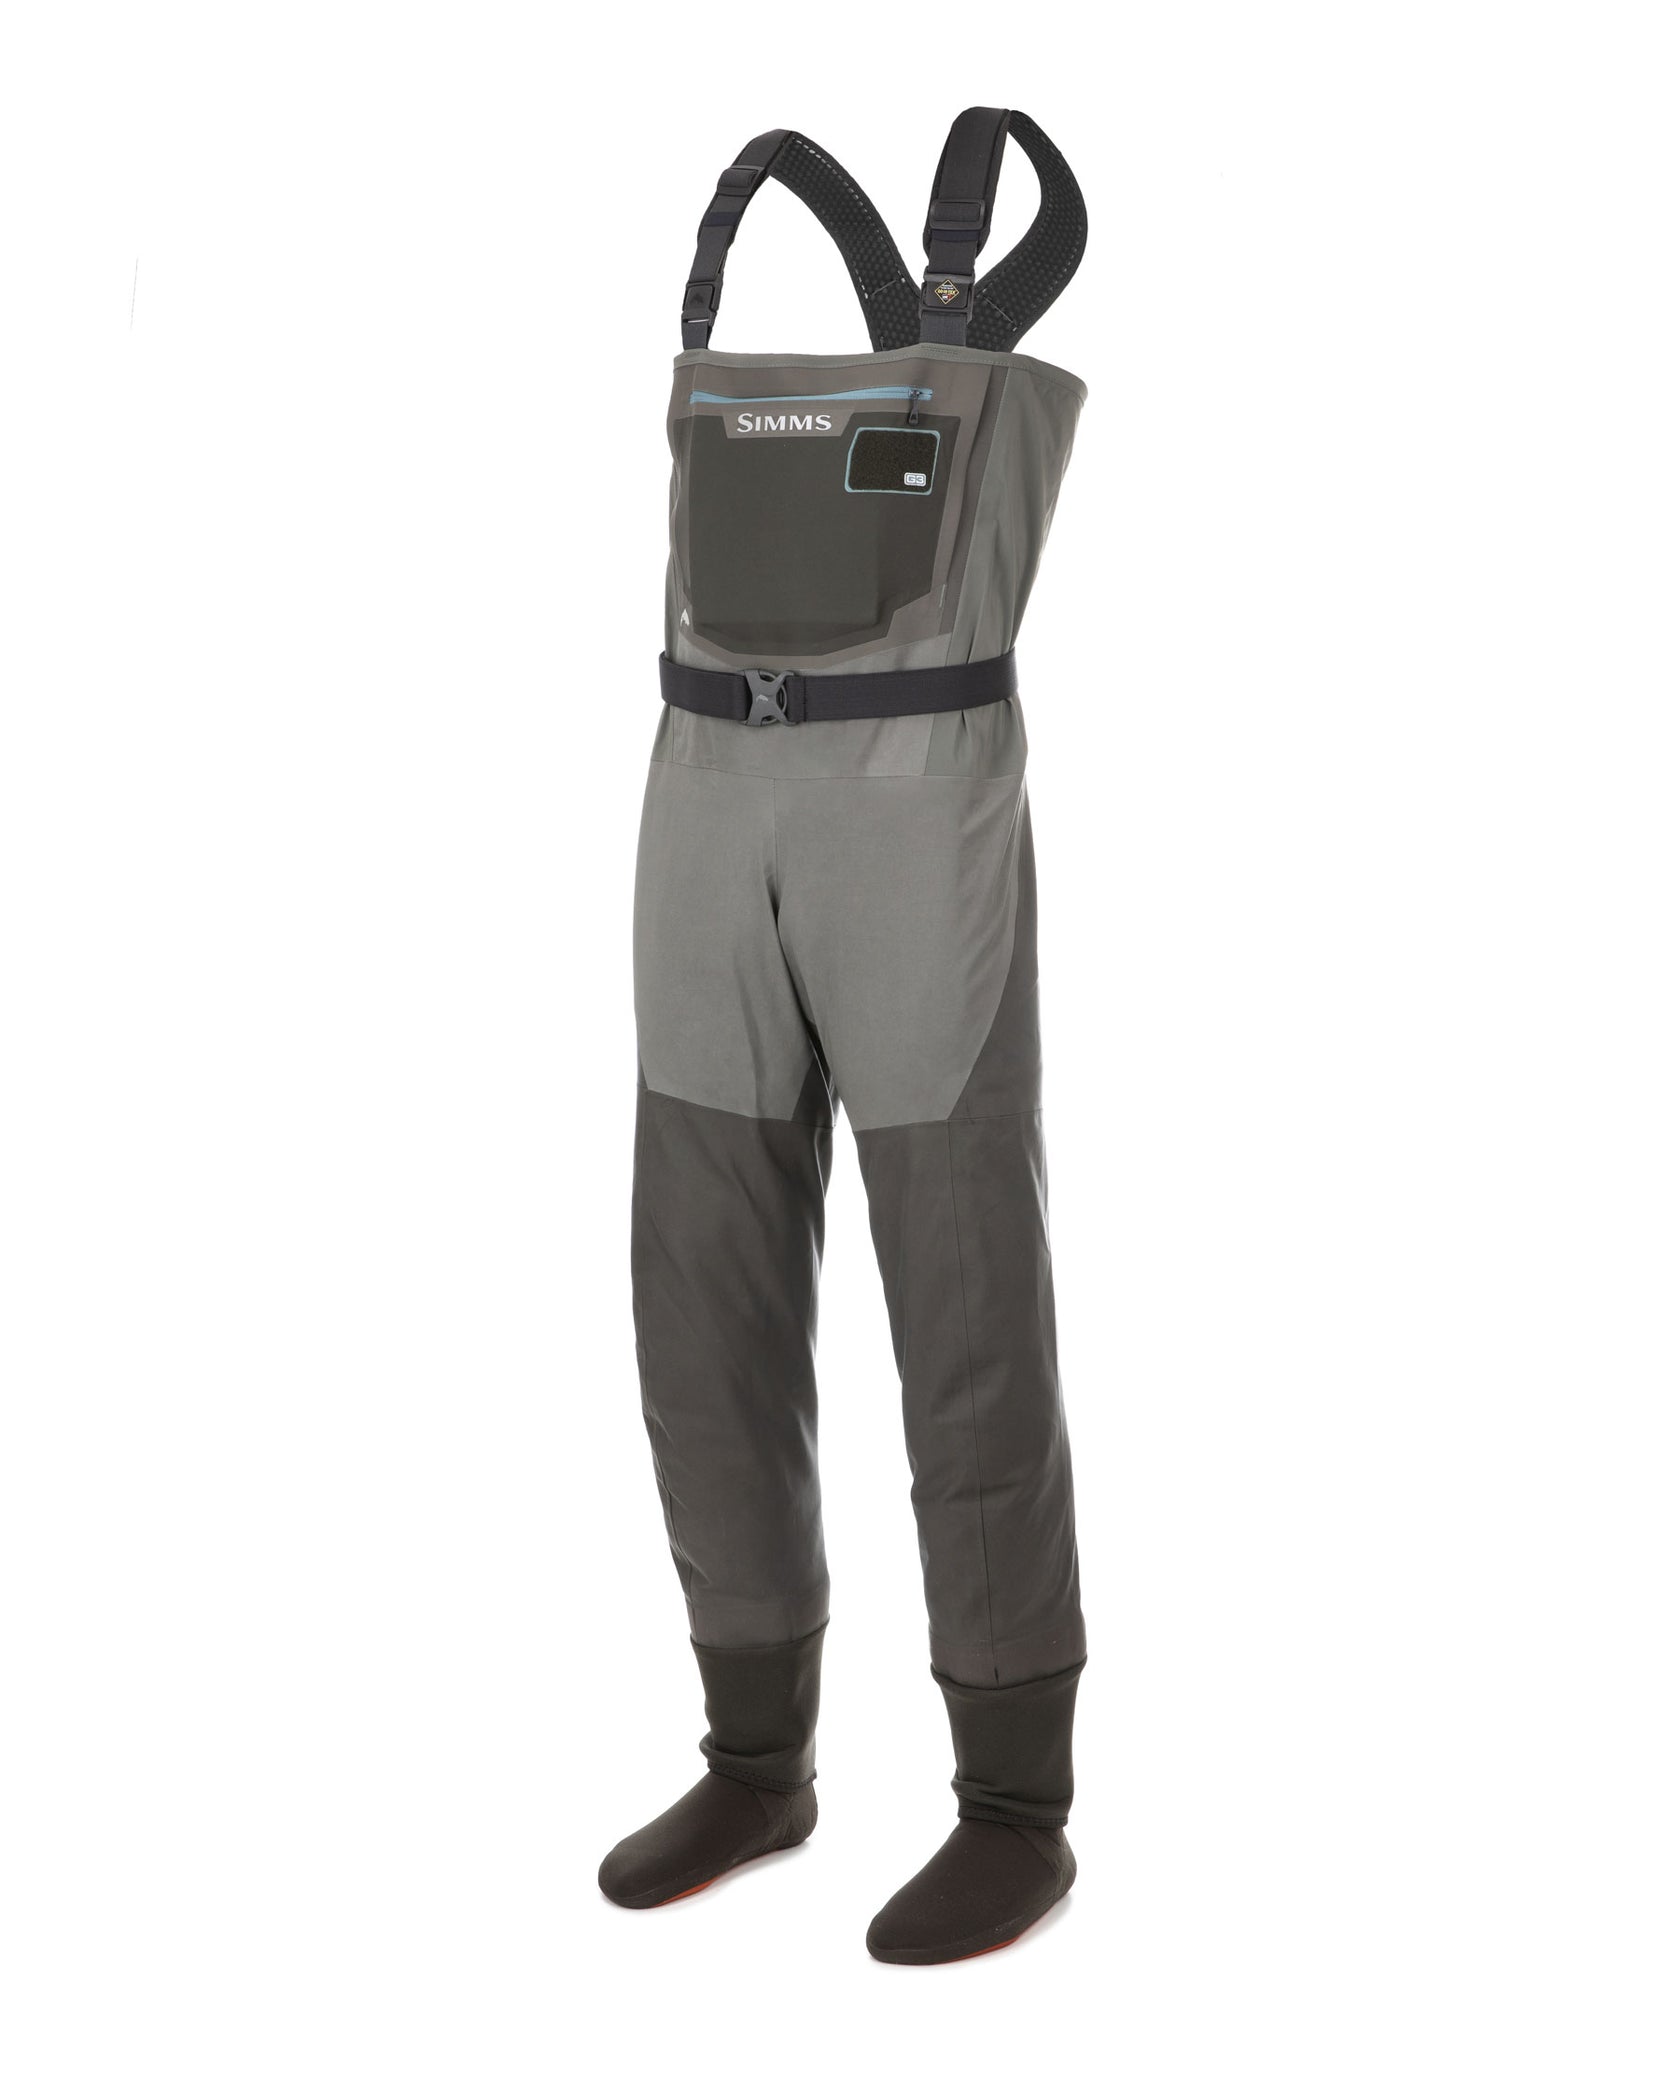 Simms W's G3 Guide Waders - Large